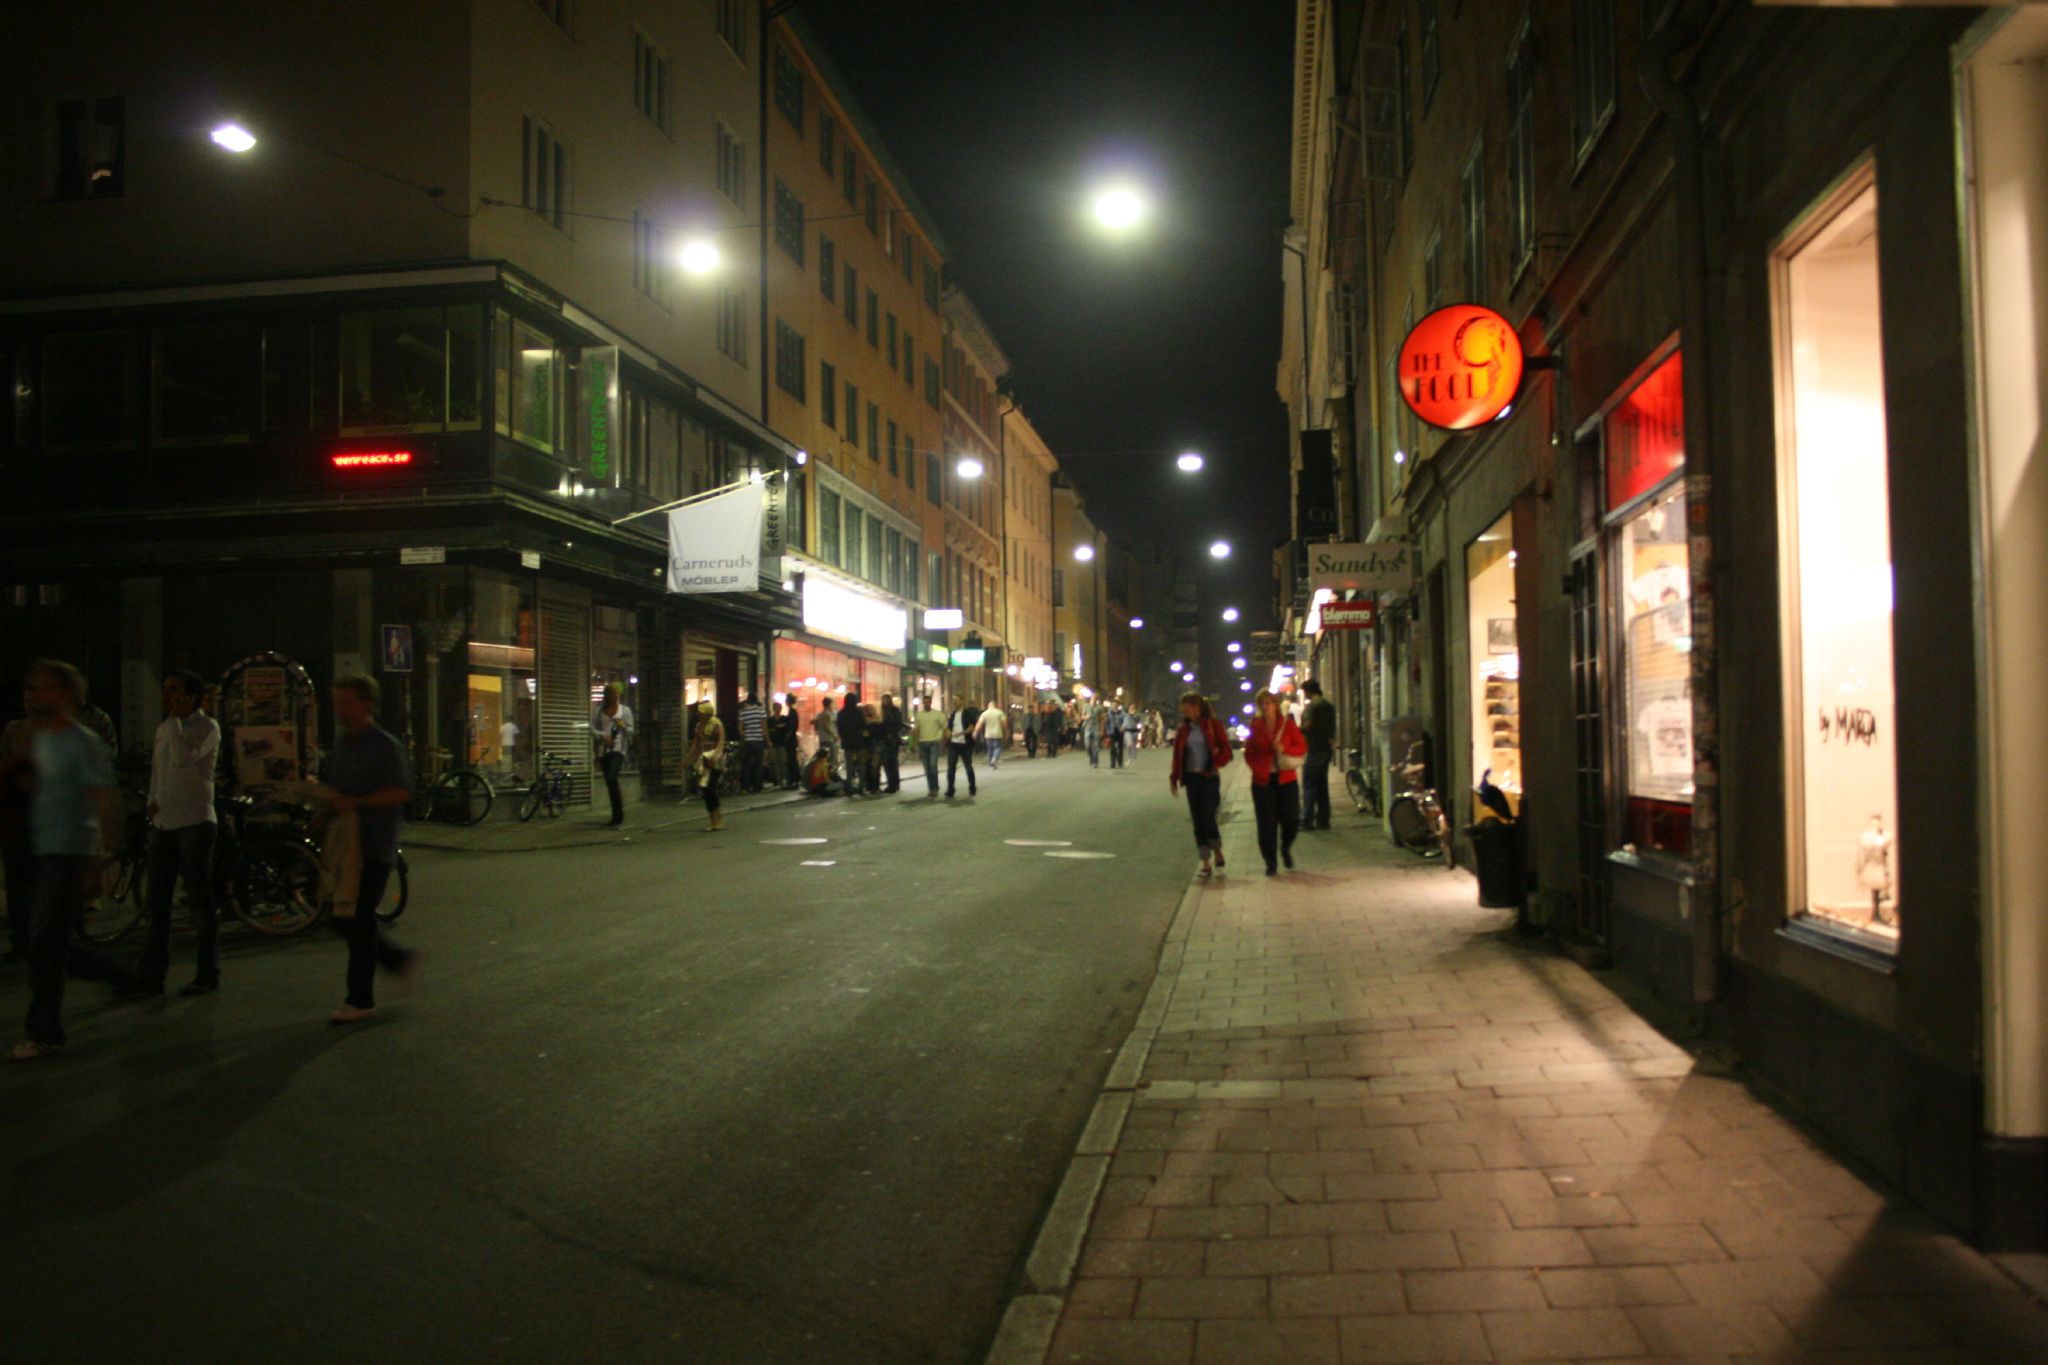 people walk down the street at night near stores